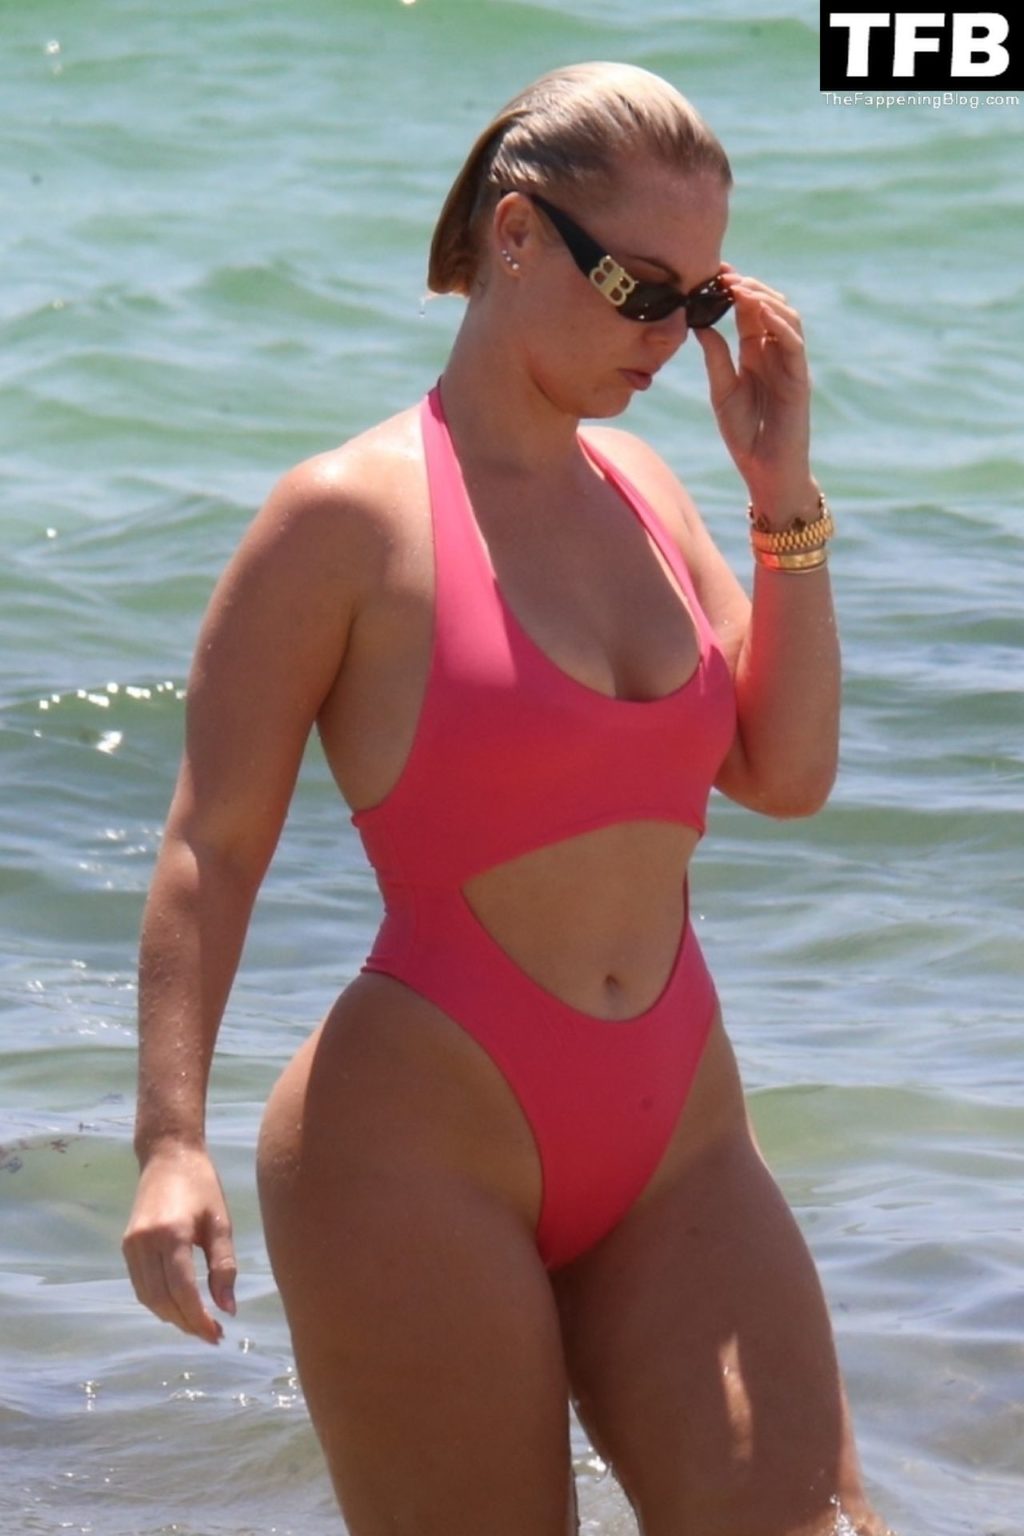 Bianca Elouise Displays Her Curves on the Beach in Miami (54 Photos)